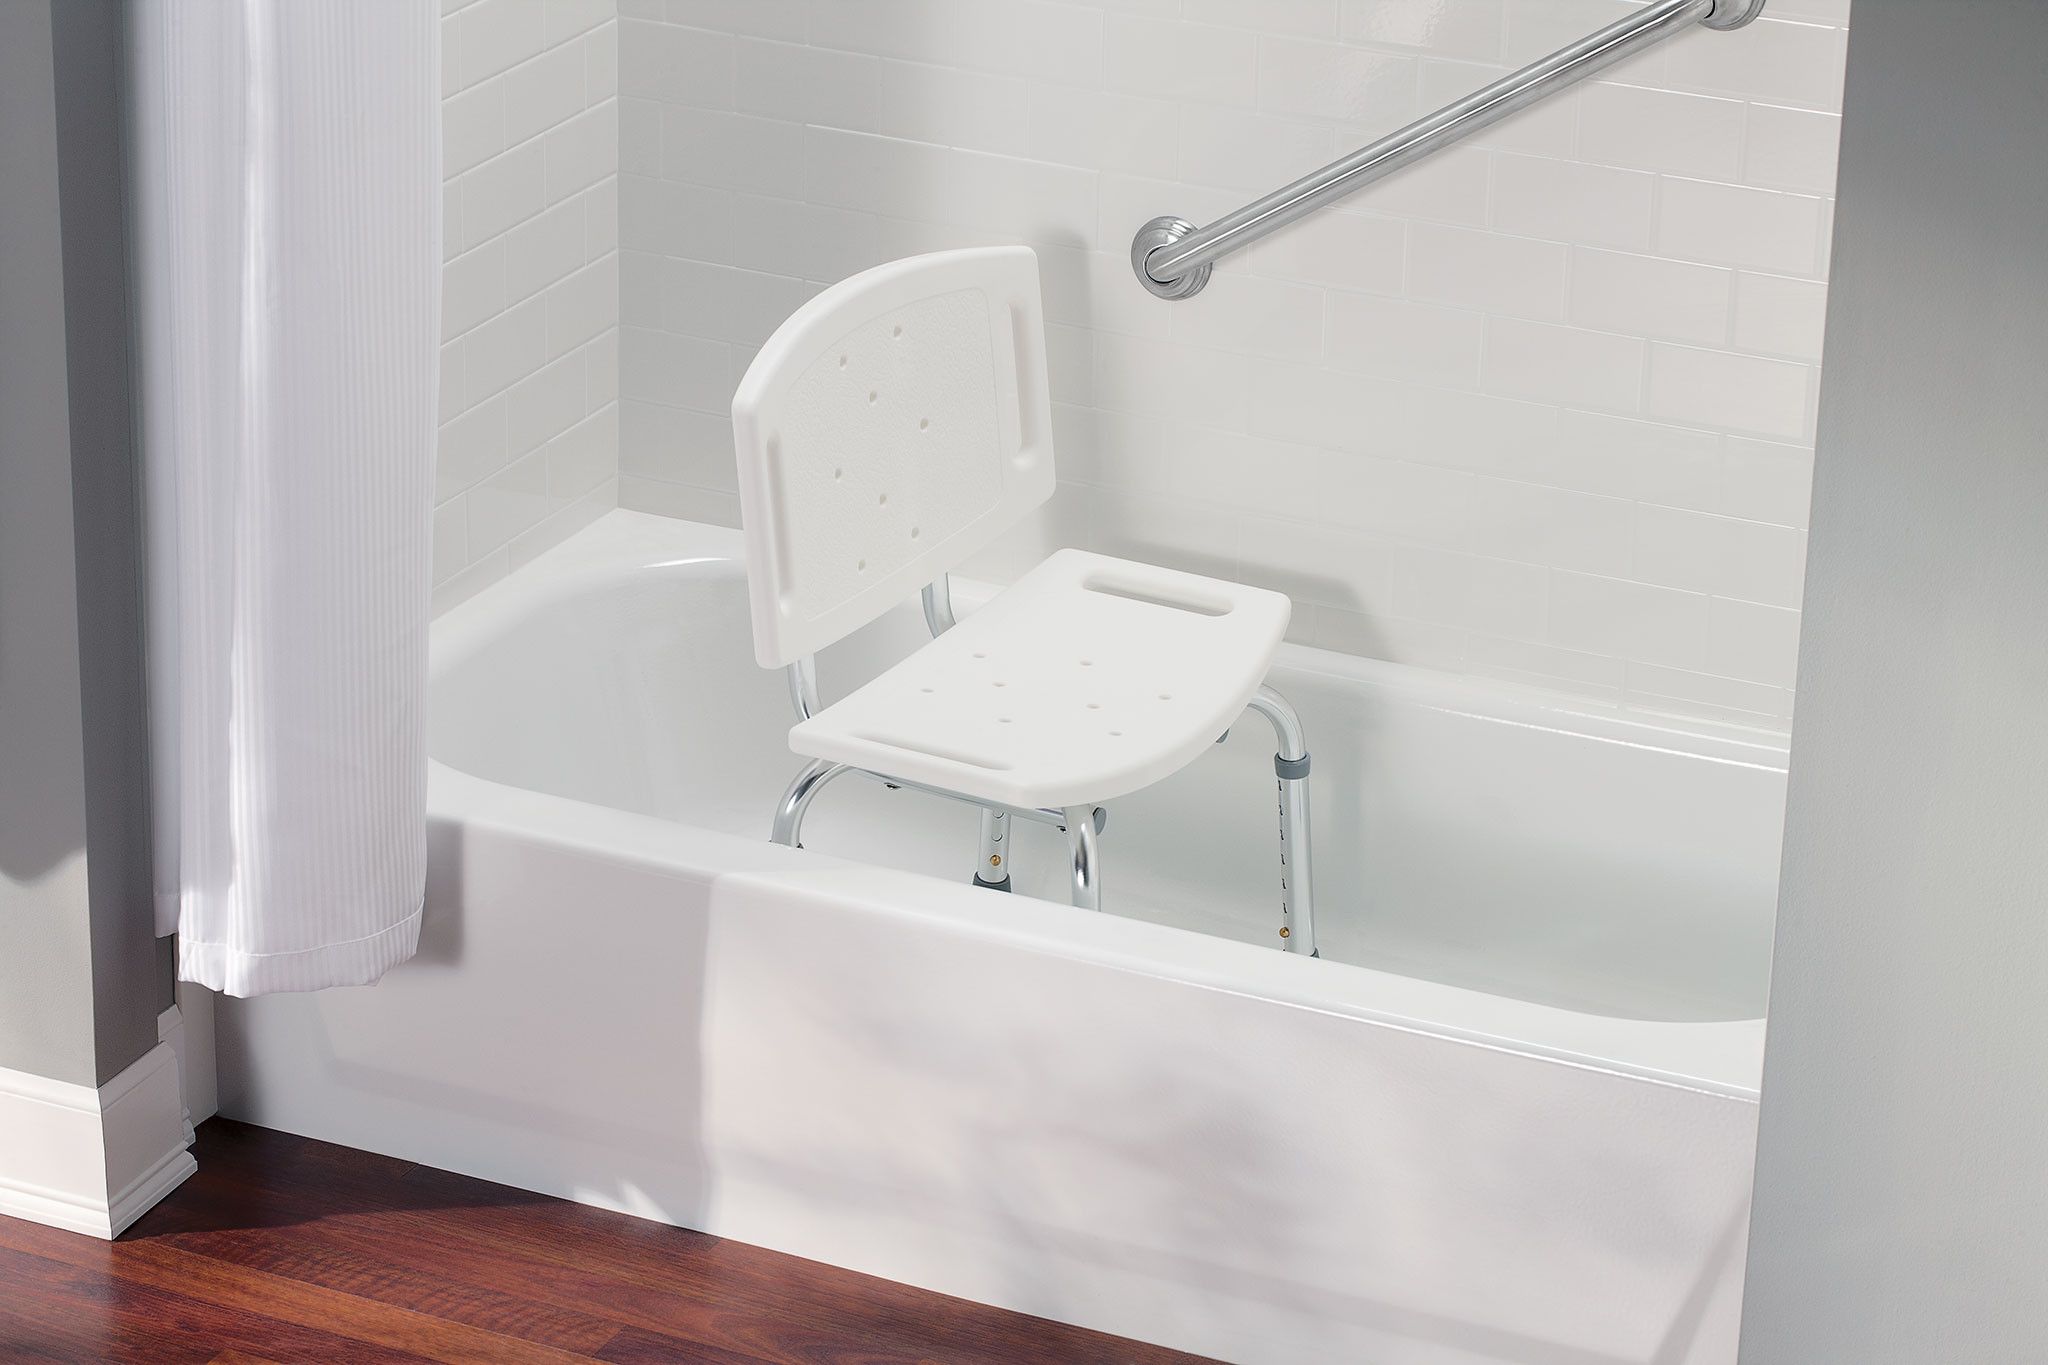 Moen Home Care Glacier Adhesive Treads in the Bathroom Safety Accessories  department at